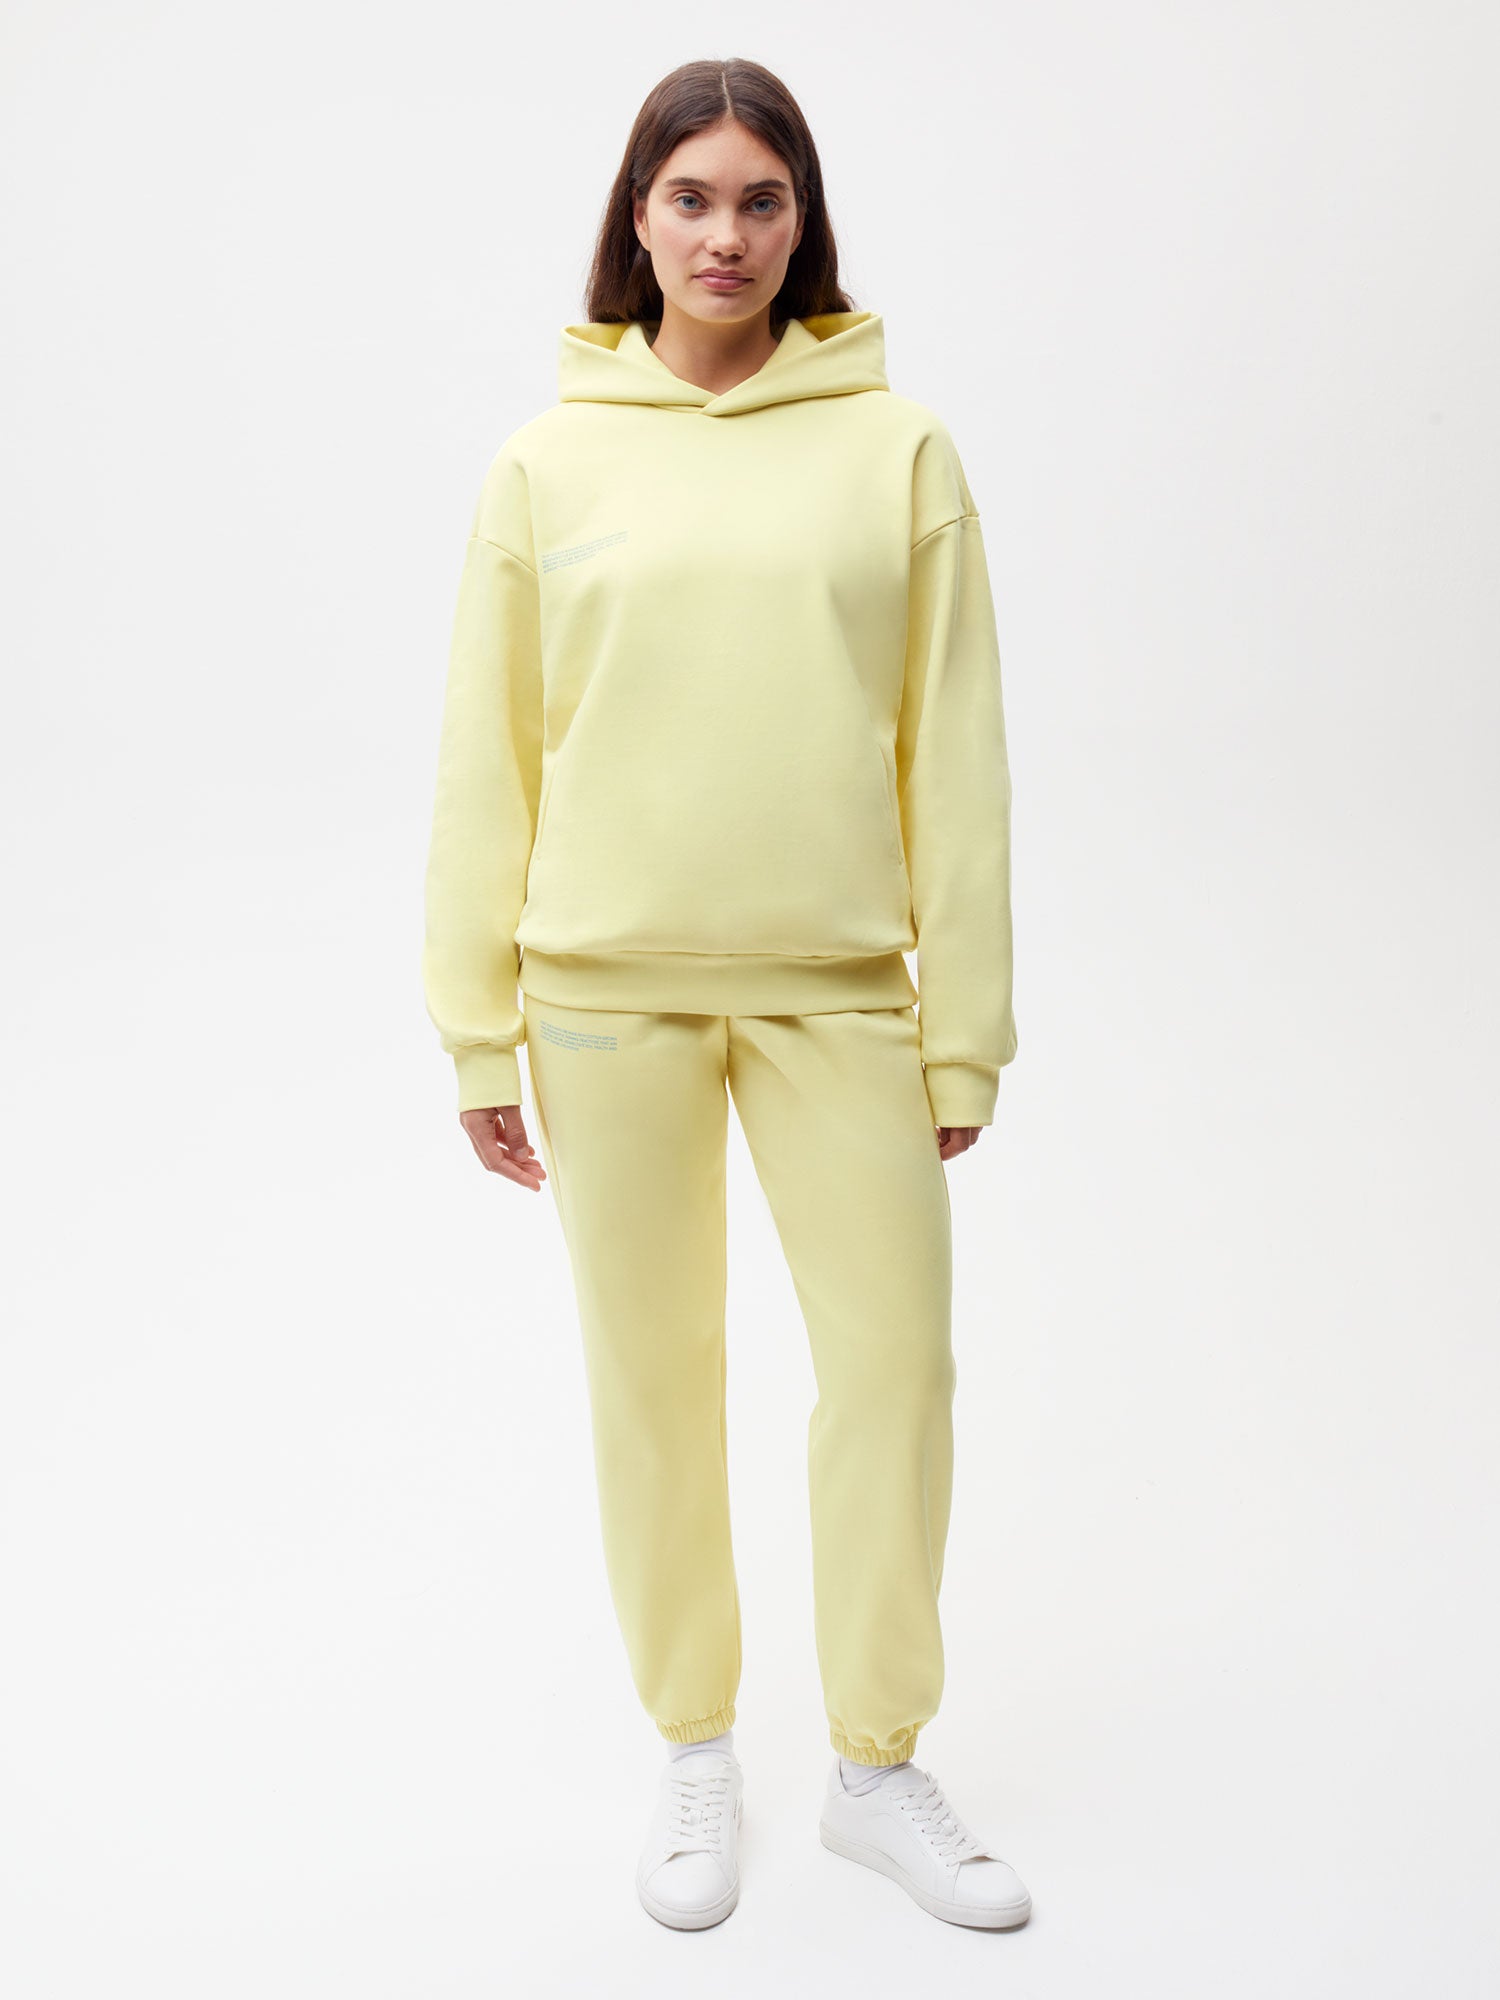 In-Conversion-Cotton-Track-Pants-Sunbeam-Yellow-Female-1